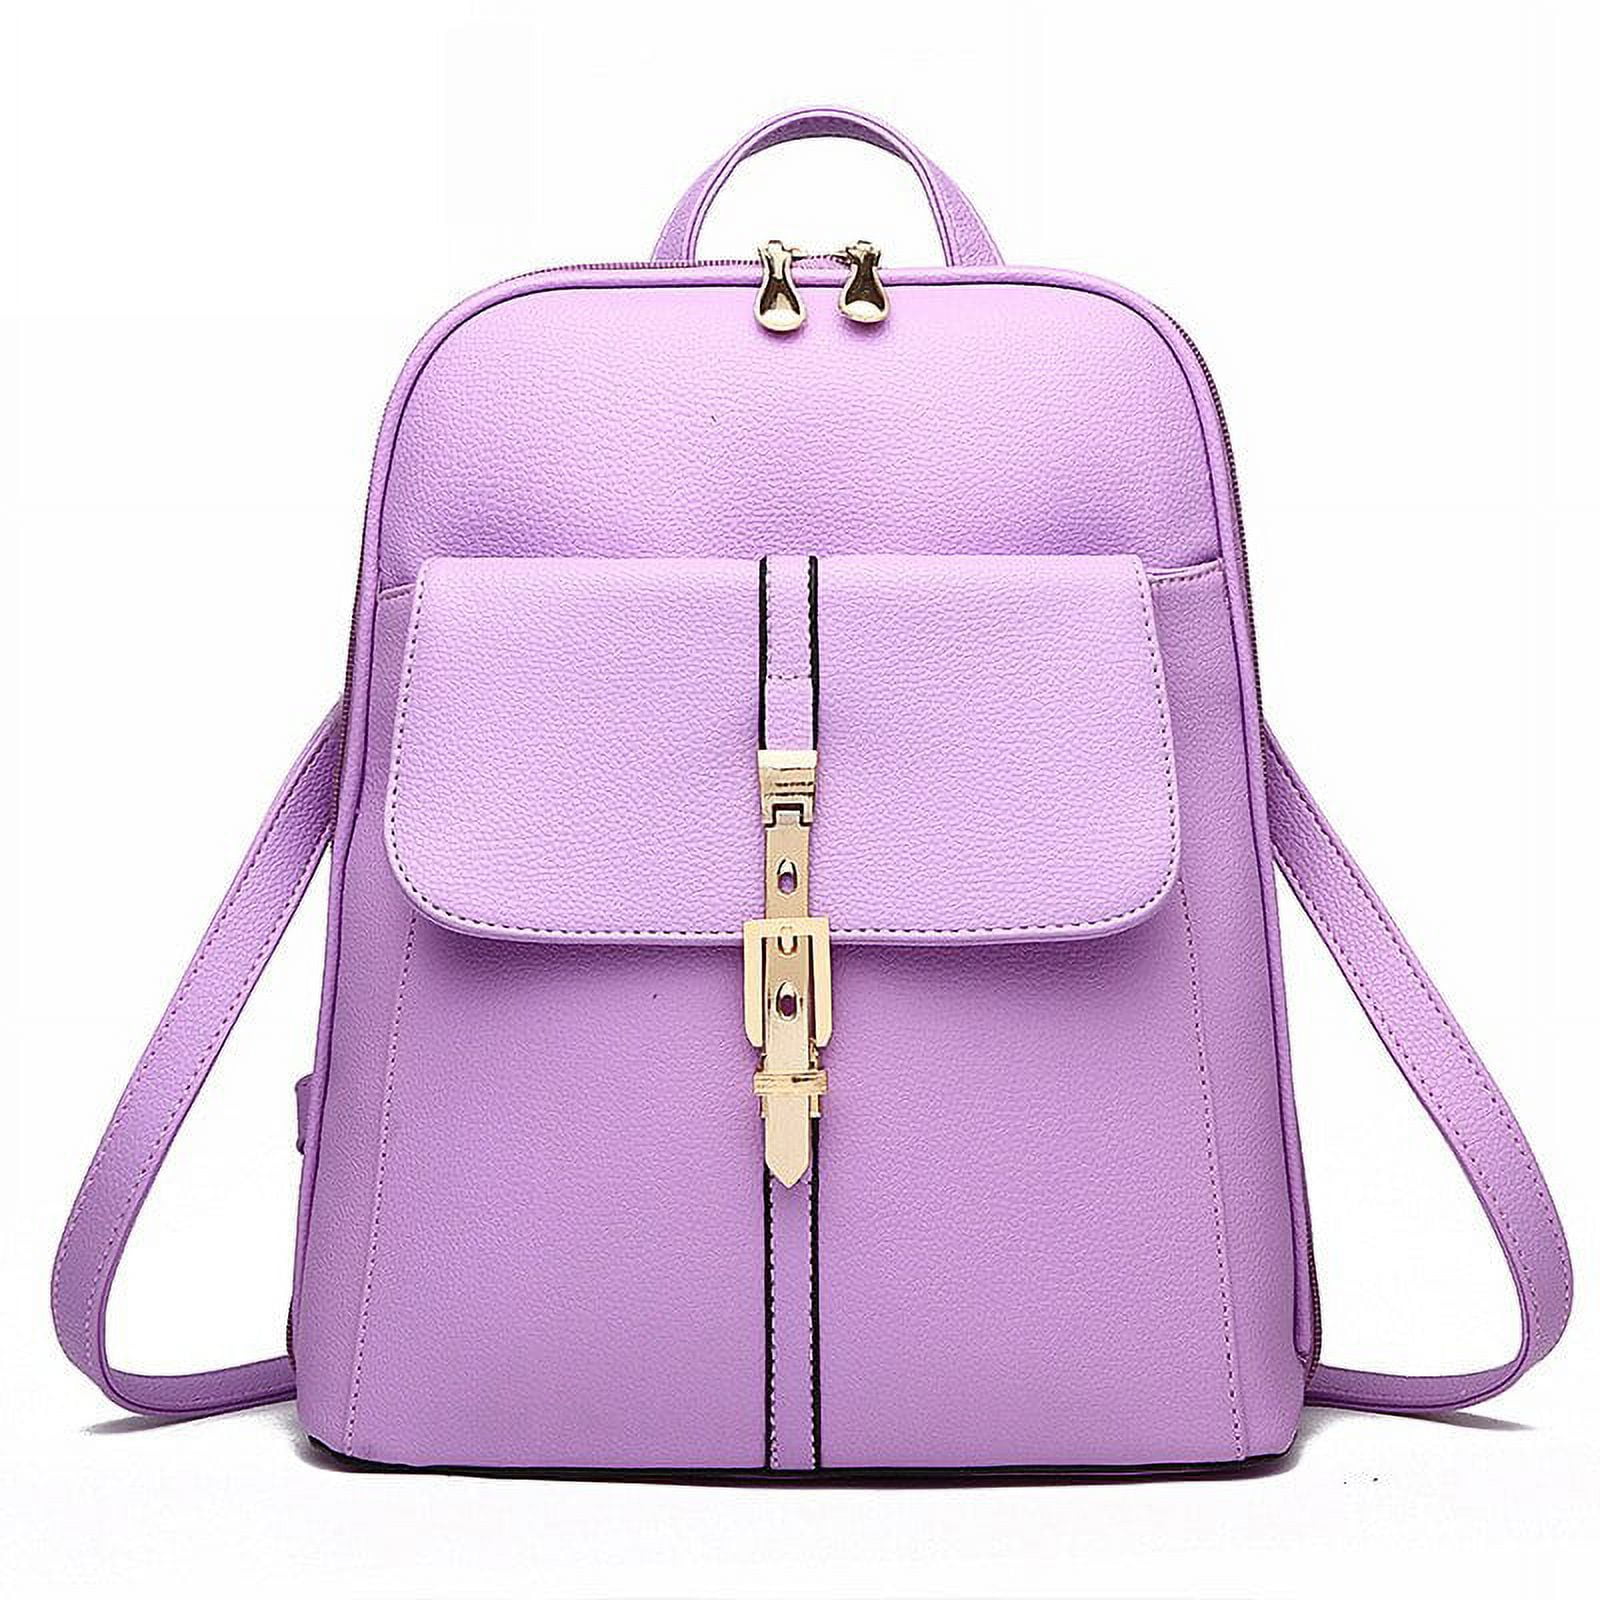 CoCopeaunts Fashion Women Backpack PU Leather Schoolbag for Teenager Girls  Female Preppy Style Solid Small Backpack School Travel Pack 